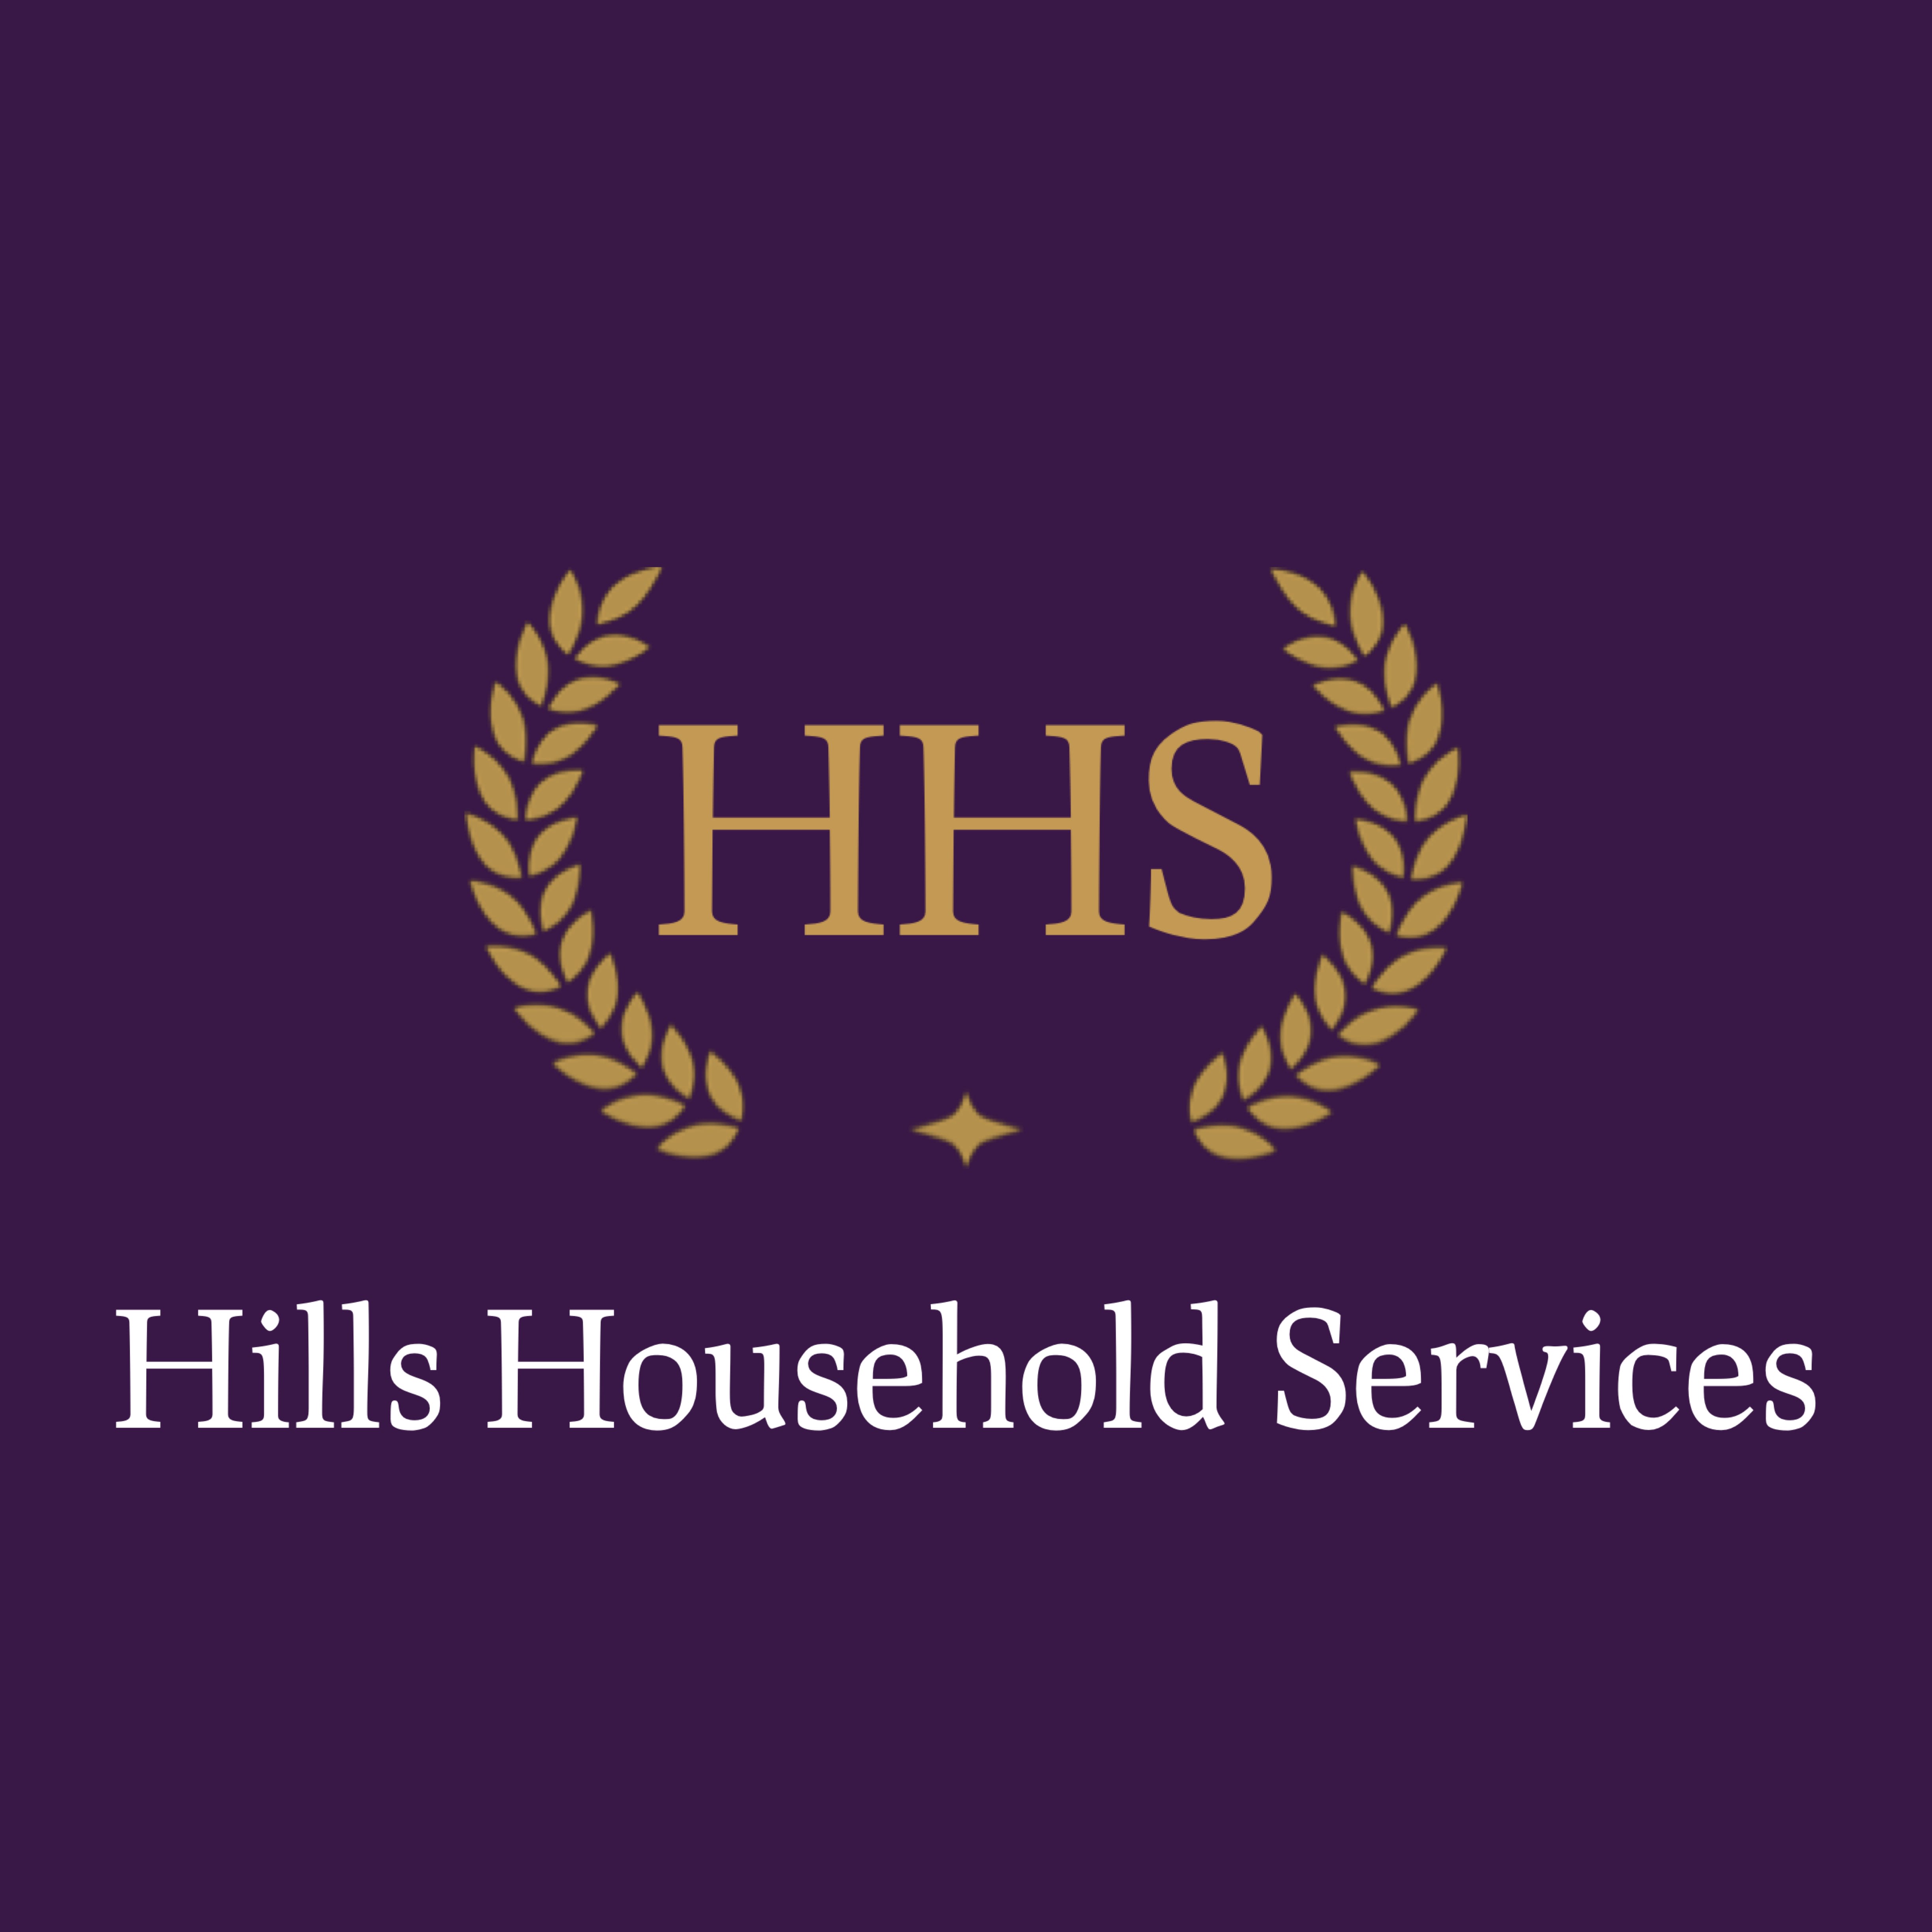 Hills Household Services